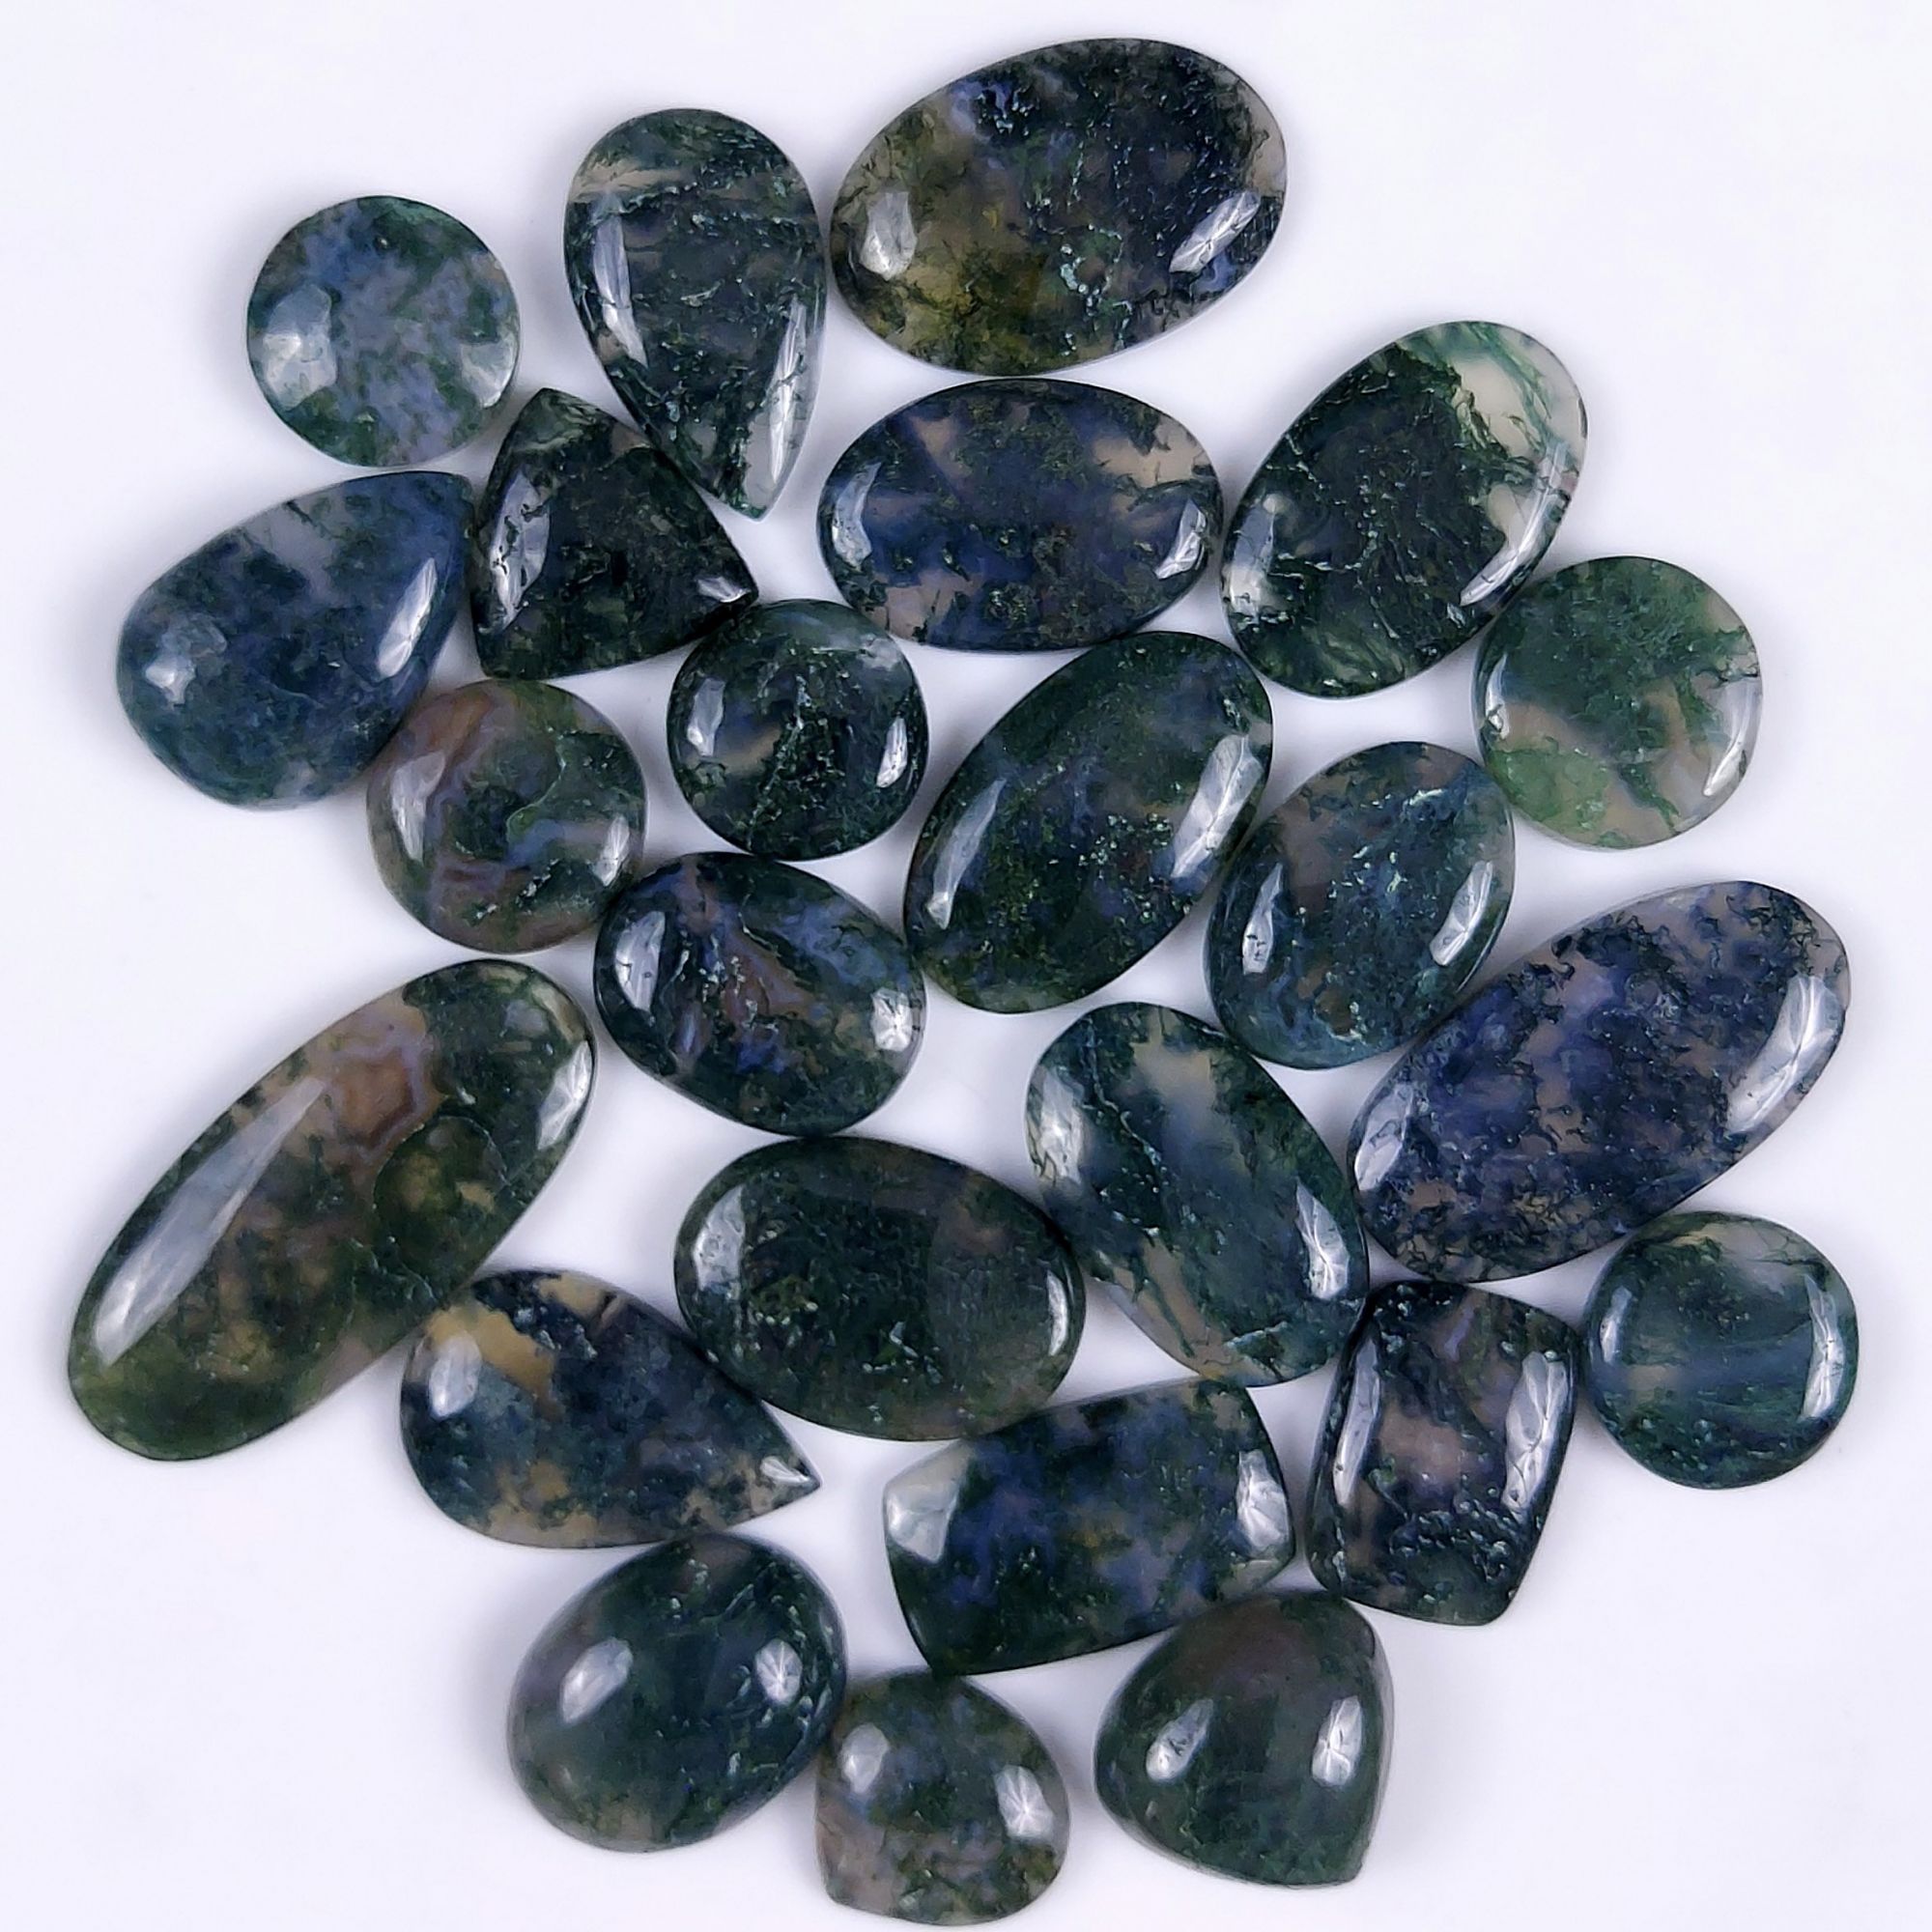 24Pcs 301Cts Natural Green Moss Agate Cabochon Lots Mixed Shapes And Sizes Moss Agate loose gemstone Cabochon Wholesale Lot 26x12 12x12 mm#G-359